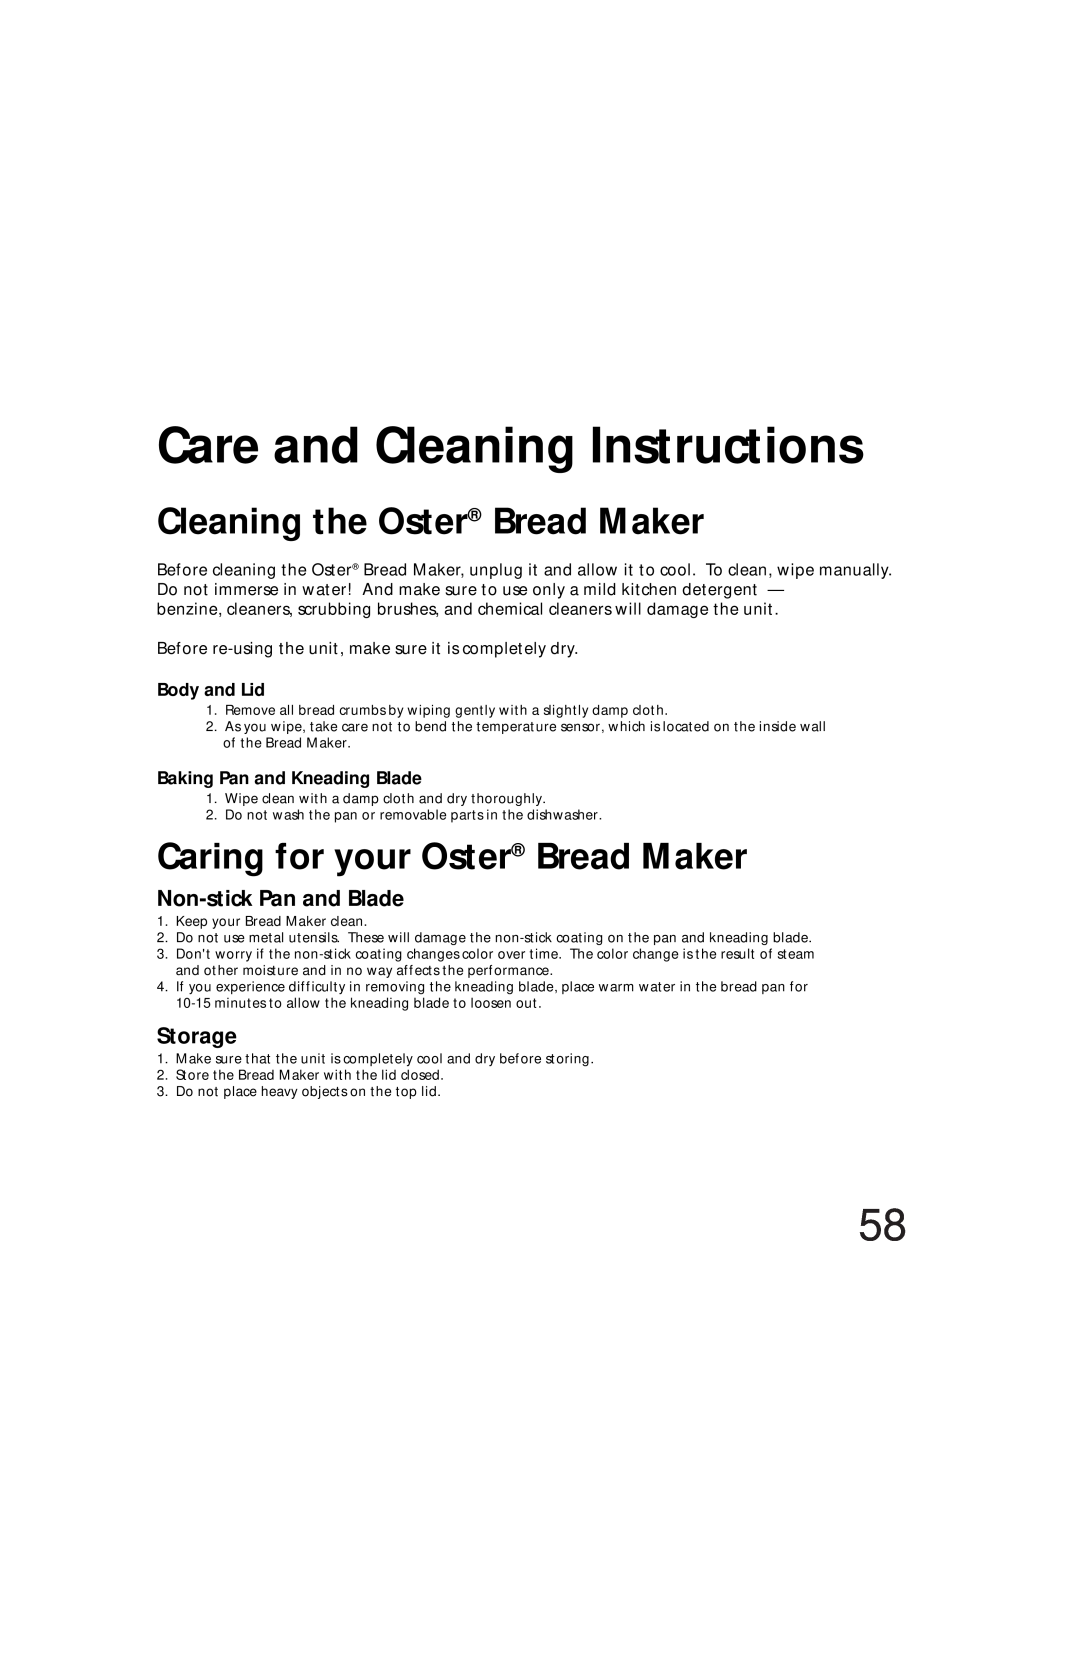 Oster Bread & Dough Maker Care and Cleaning Instructions, Cleaning the Oster Bread Maker, Non-stickPan and Blade, Storage 